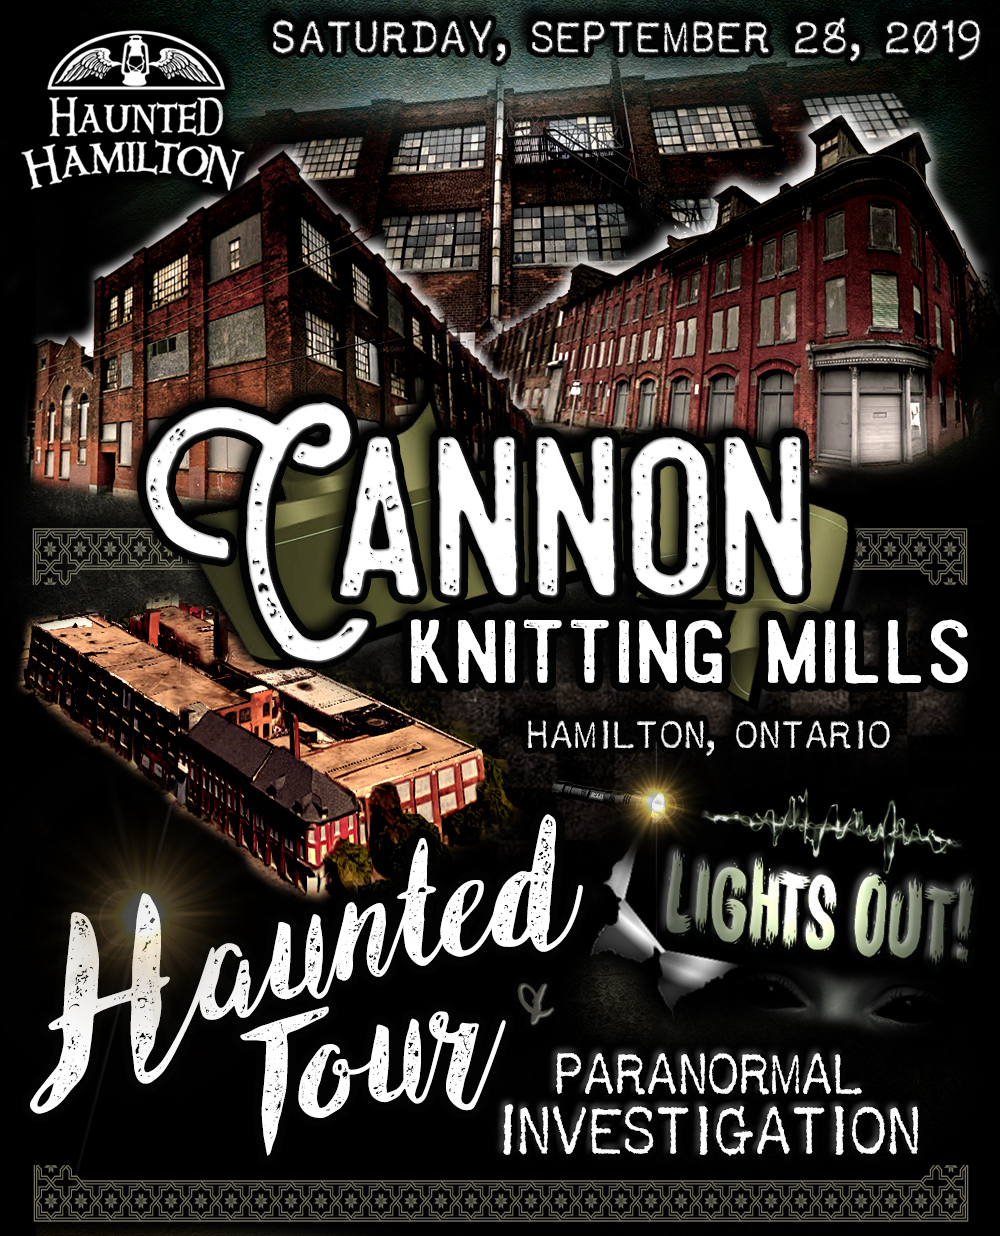 Haunted Hamilton presents The Cannon Knitting Mills | An Interactive HAUNTED TOUR and Paranormal Investigation hosted by Haunted Hamilton | Hamilton, Ontario, Canada